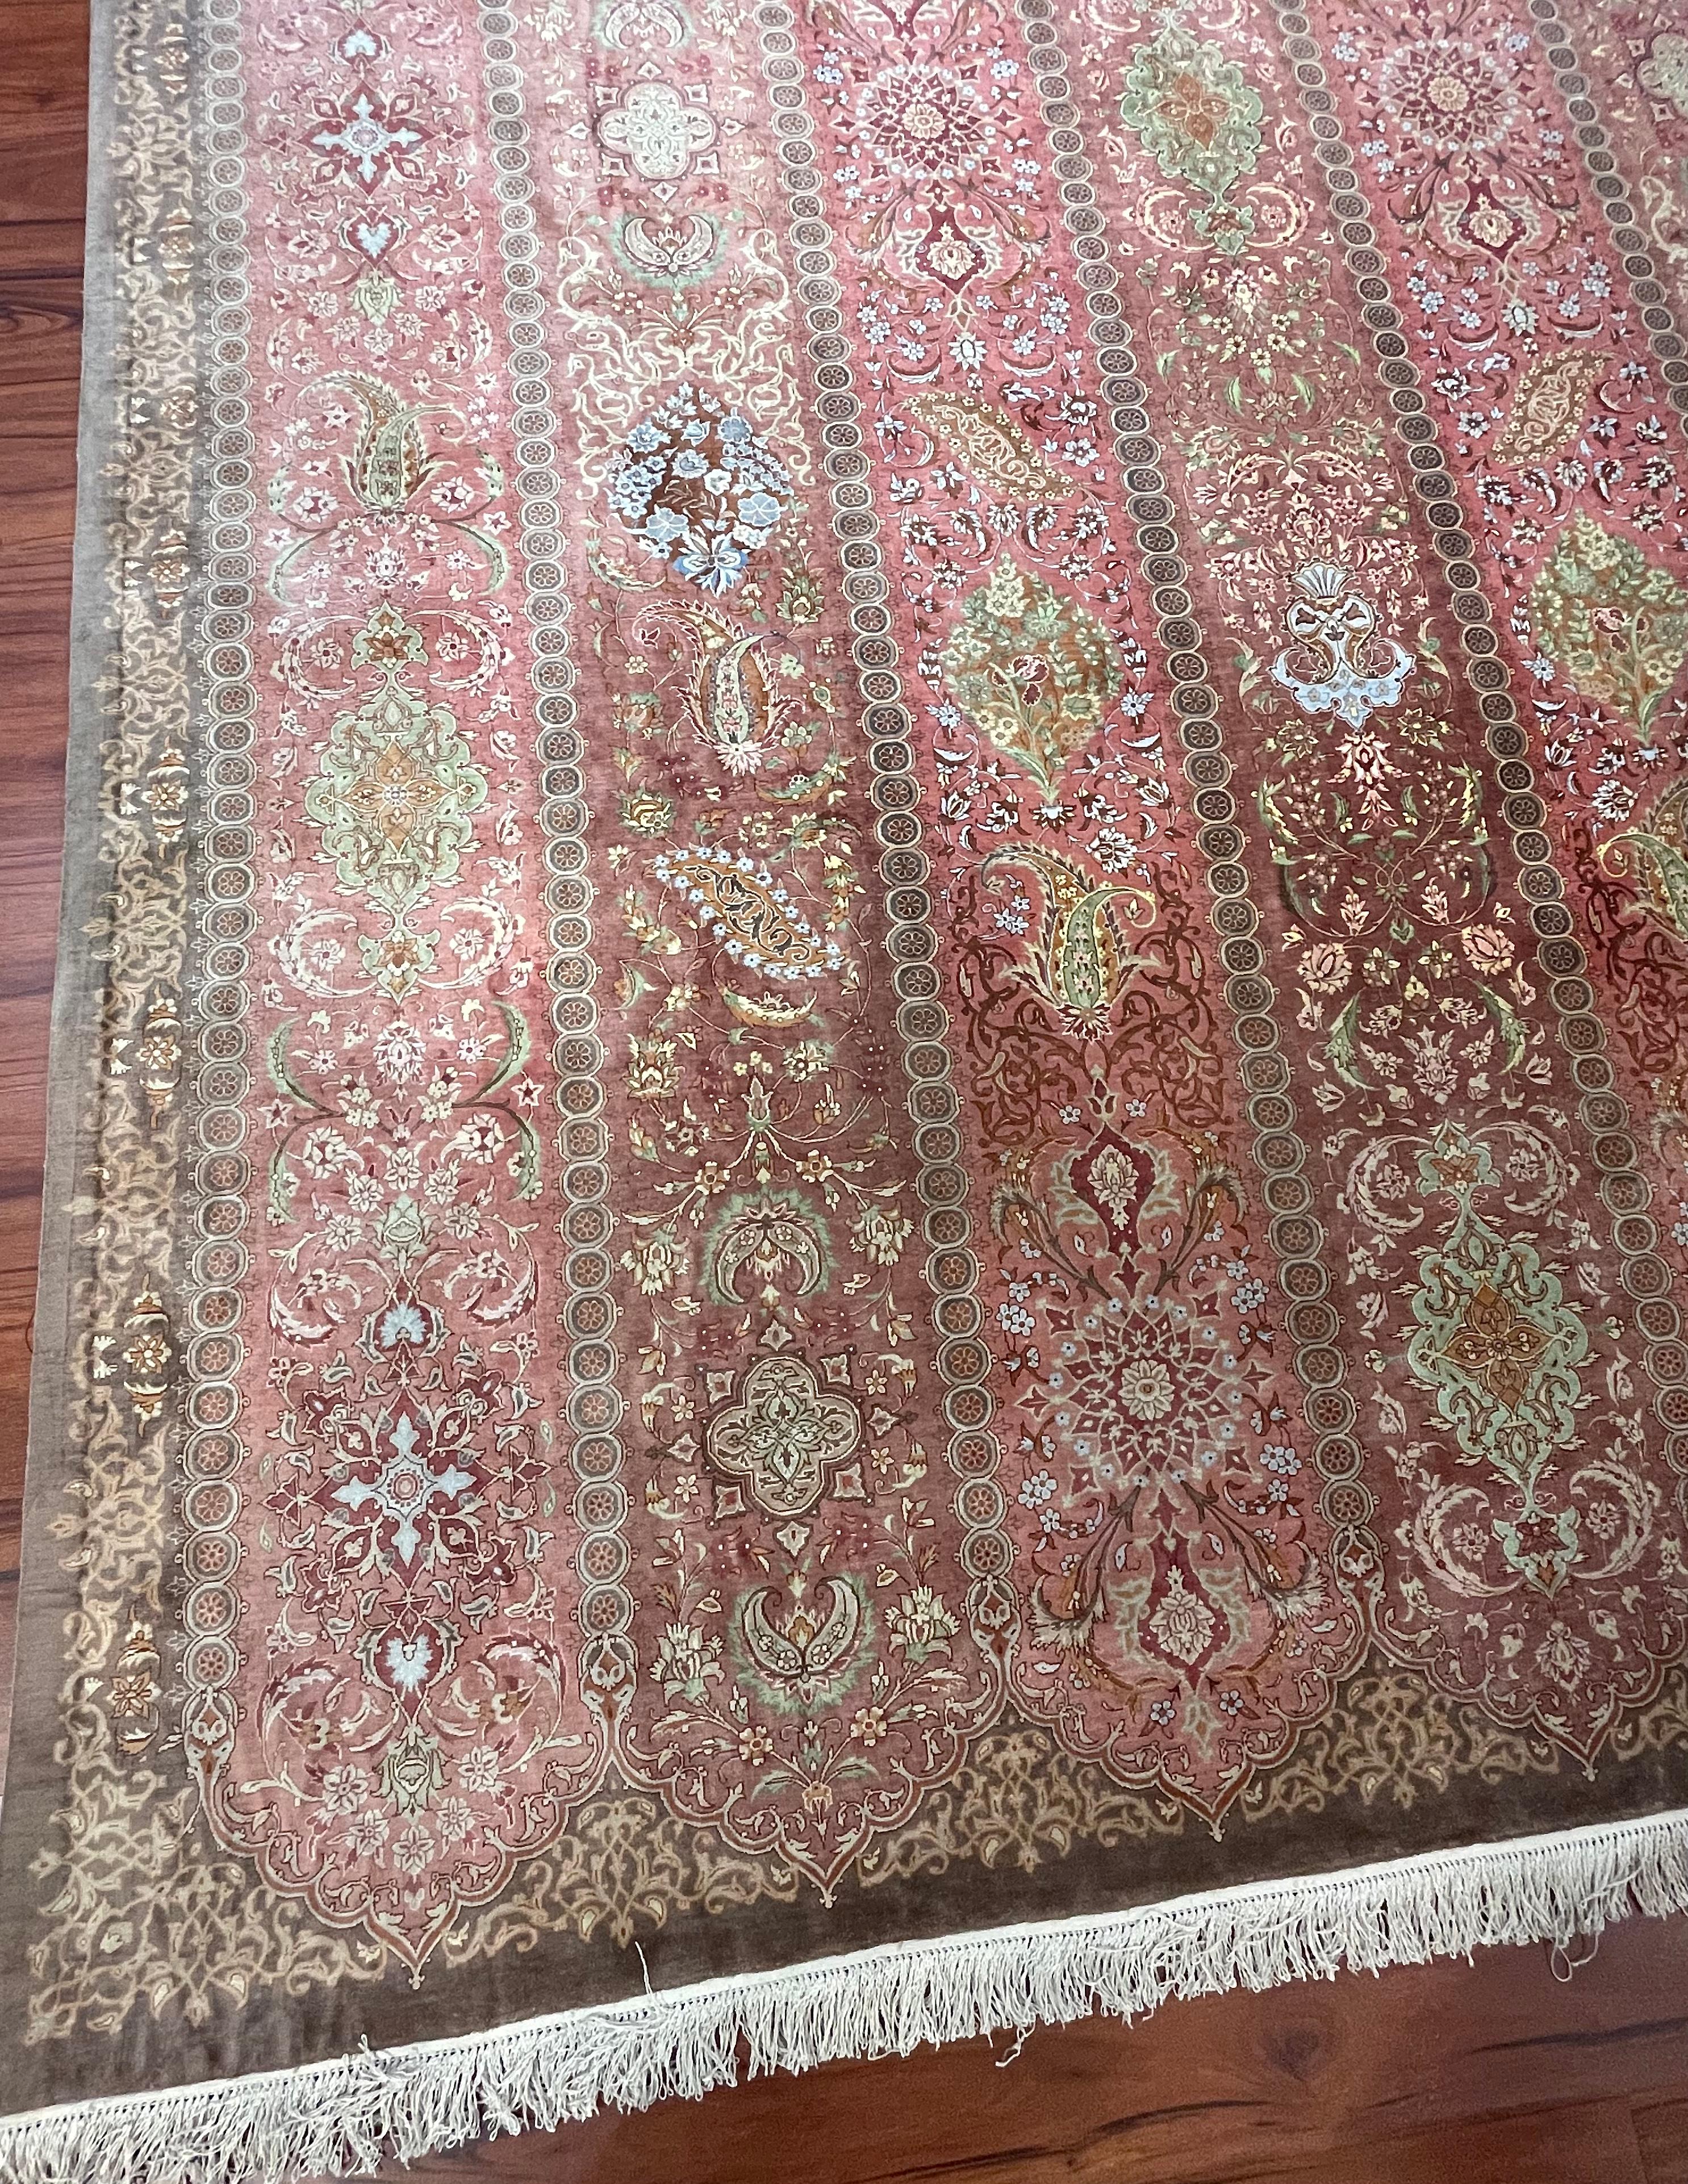 Extremely Fine Silk Persian Qum Rug/Carpet In Excellent Condition For Sale In Gainesville, VA